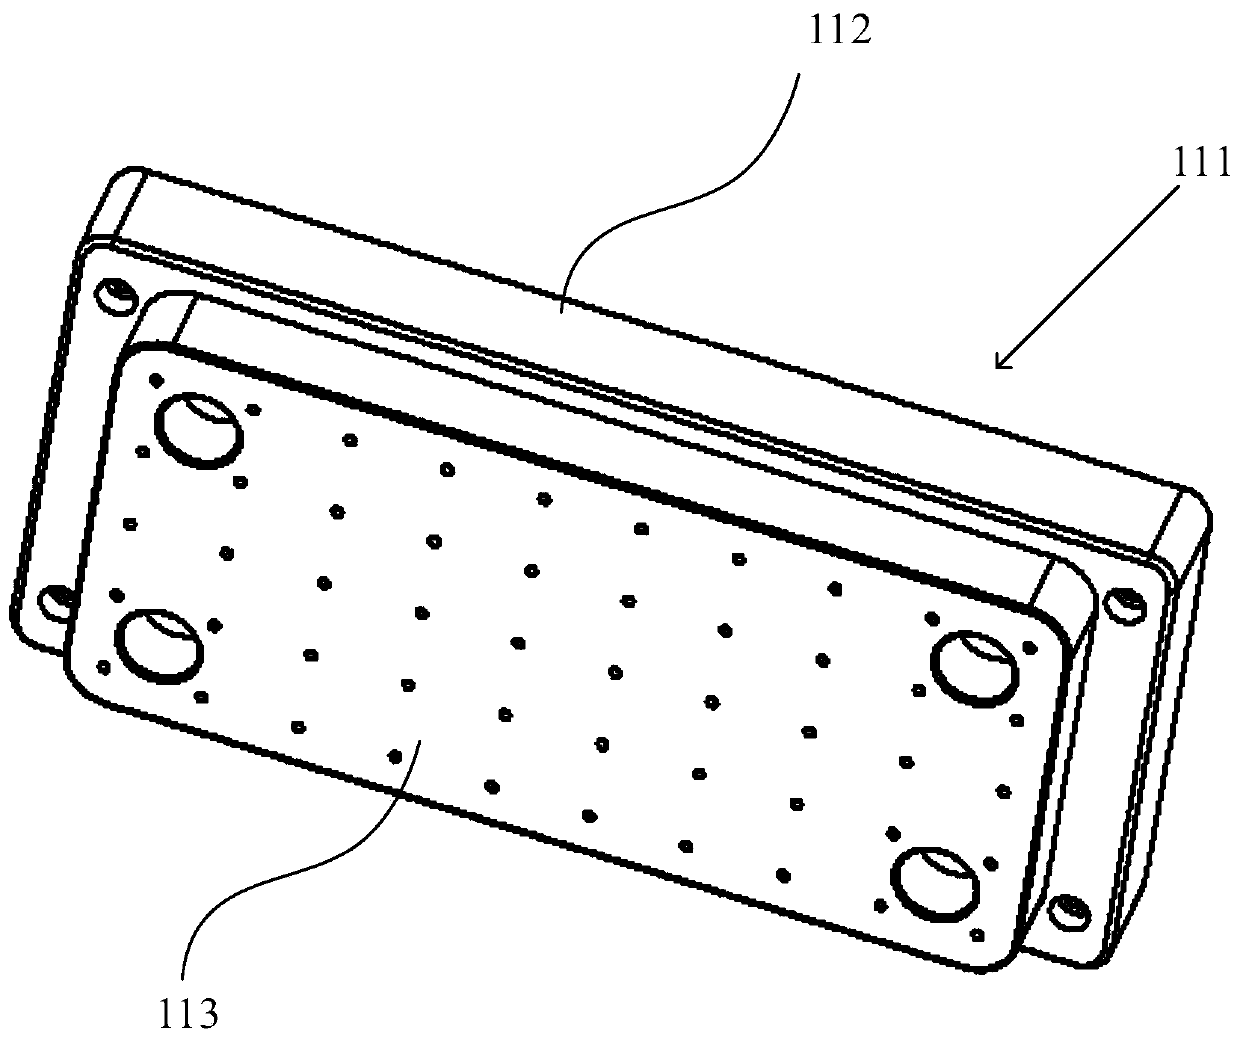 Apparatus for screen assembly